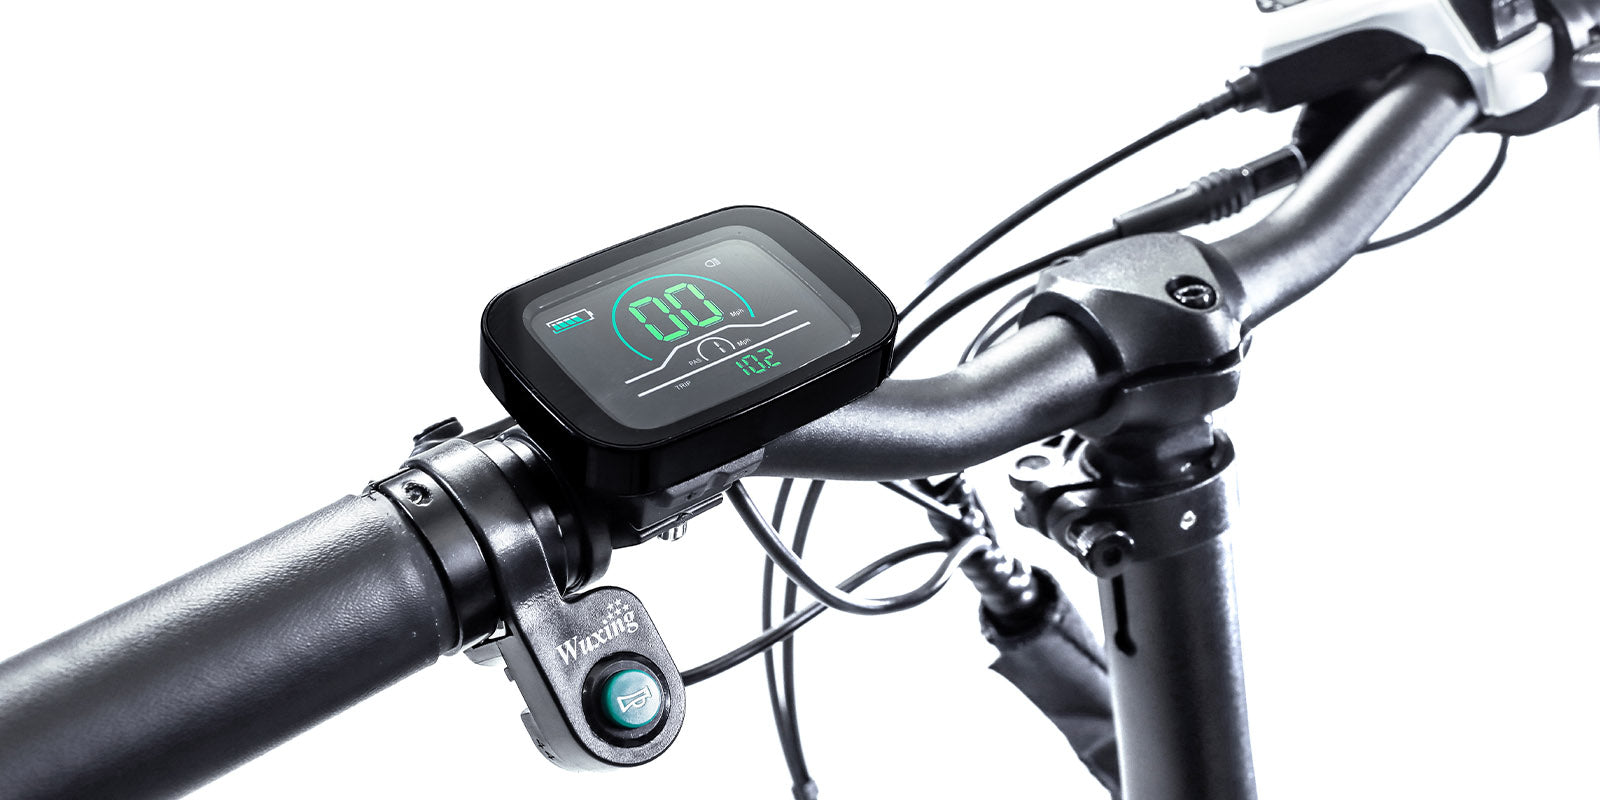 Showing off the Emerald ebike's horn, pedal assist, and lcd display.